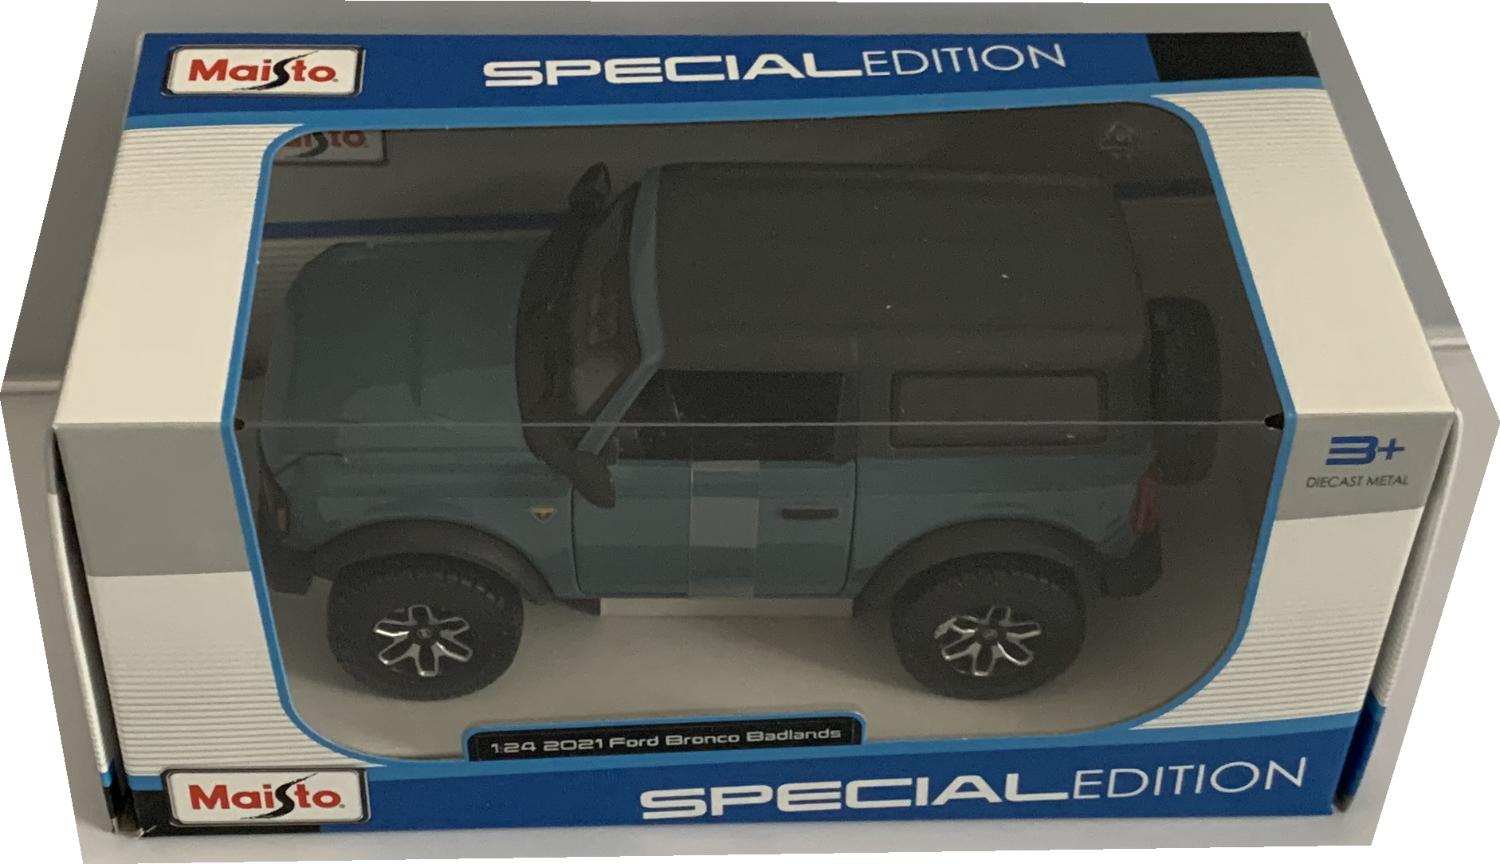 An excellent scale model of a Ford Bronco Badlands decorated in blue with black roof and silver and black wheels.